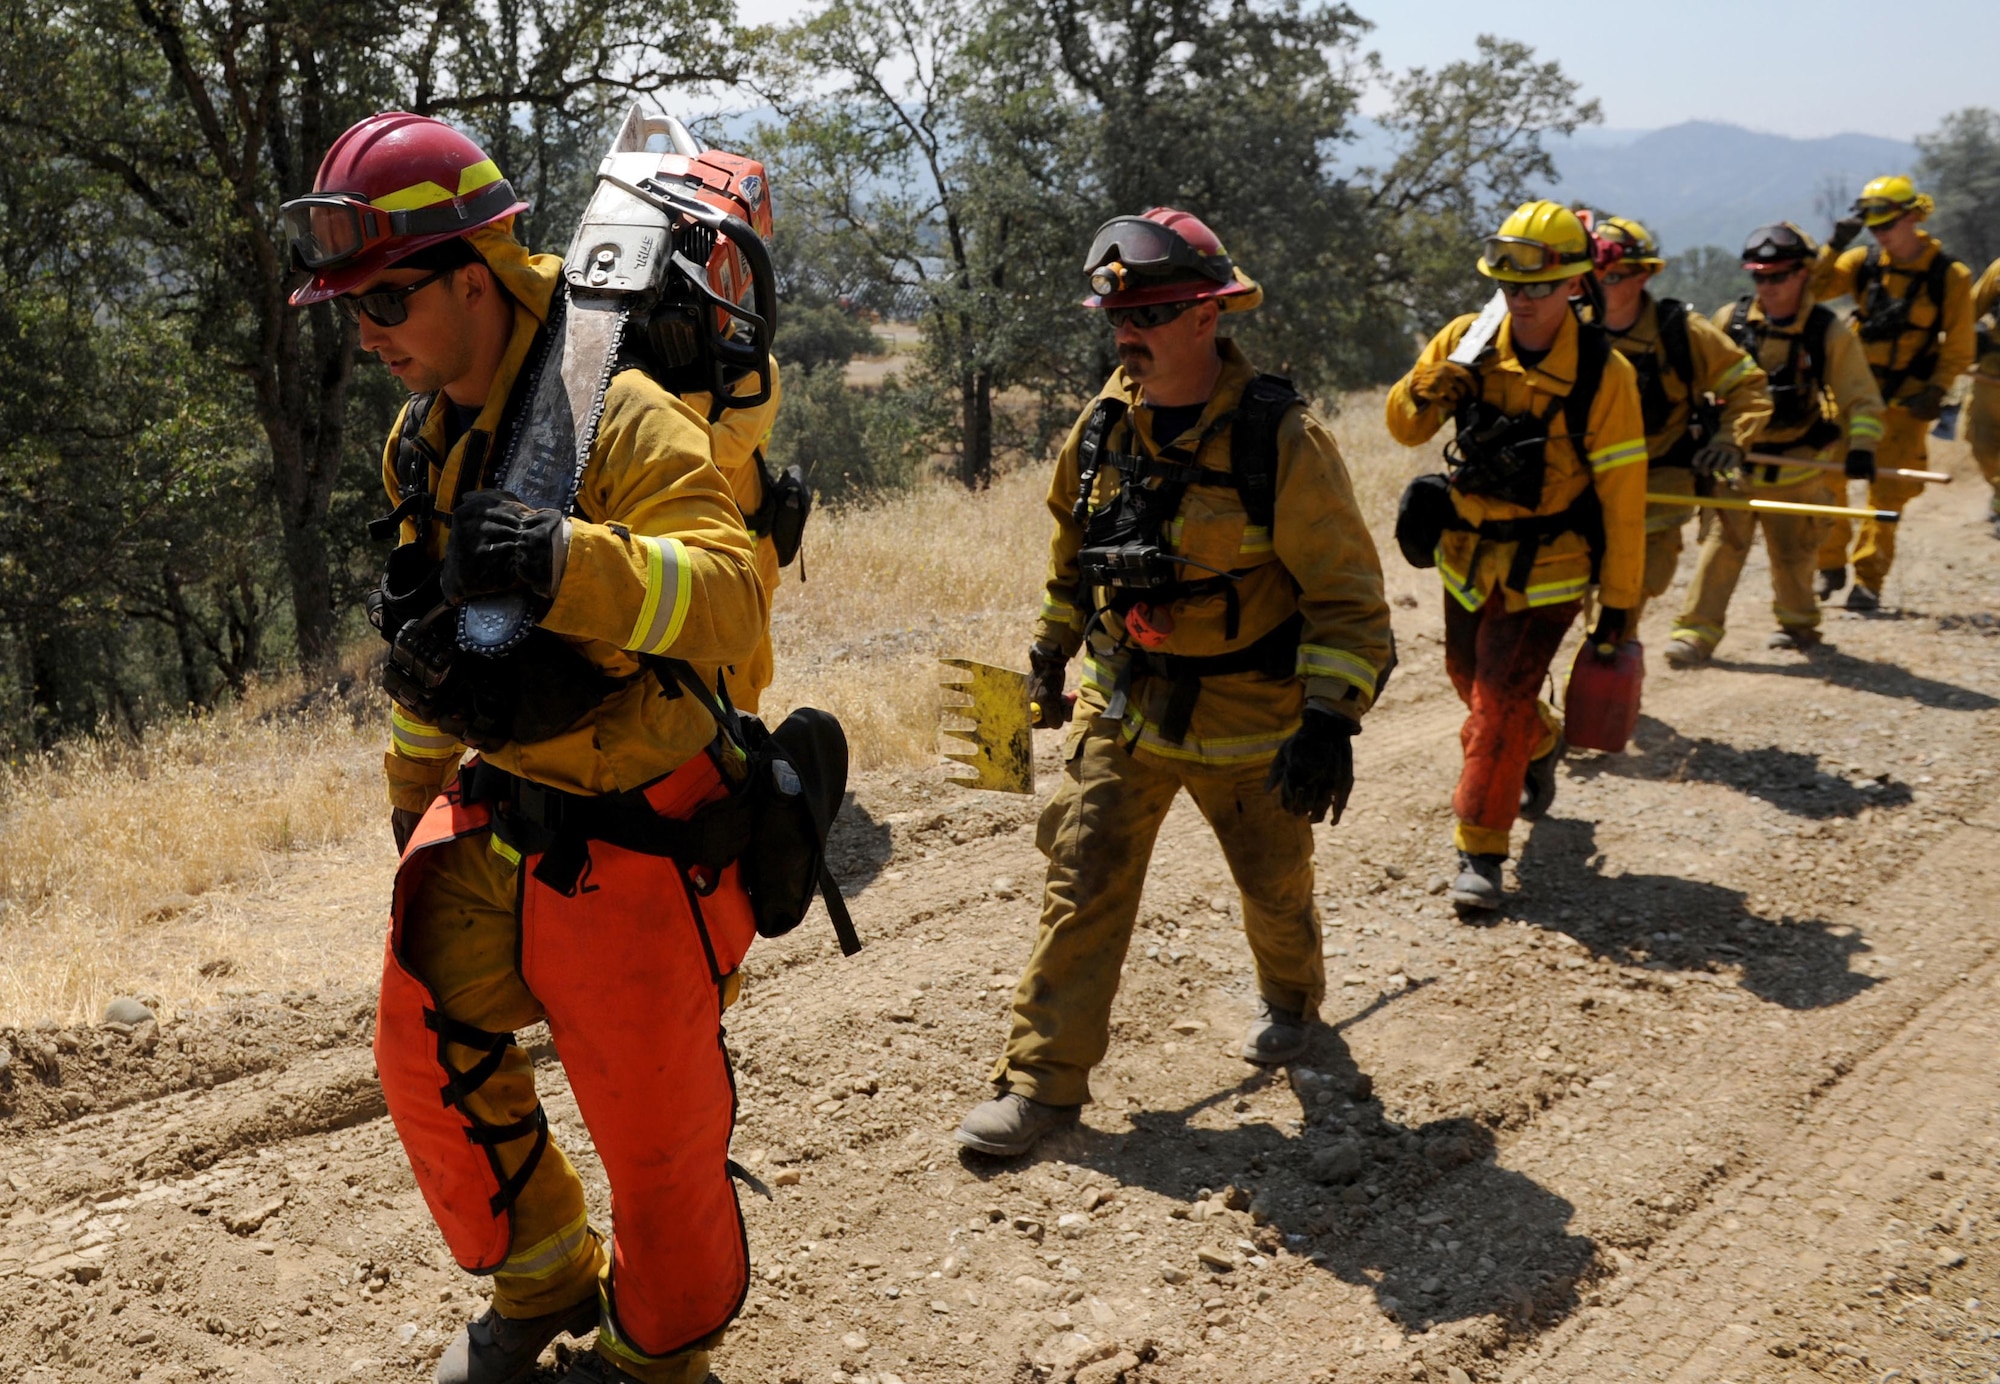 Steven Dobbs, a 9th Civil Engineer Squadron fire captain, carries a chainsaw up a hill in front of other fire prevention organization members Aug. 6, 2015, near Clearlake, Calif. The firefighters were sent to clear brush away from burned sections of land to prevent embers from igniting unburned areas. (U.S. Air Force photo/Airman Preston L. Cherry)